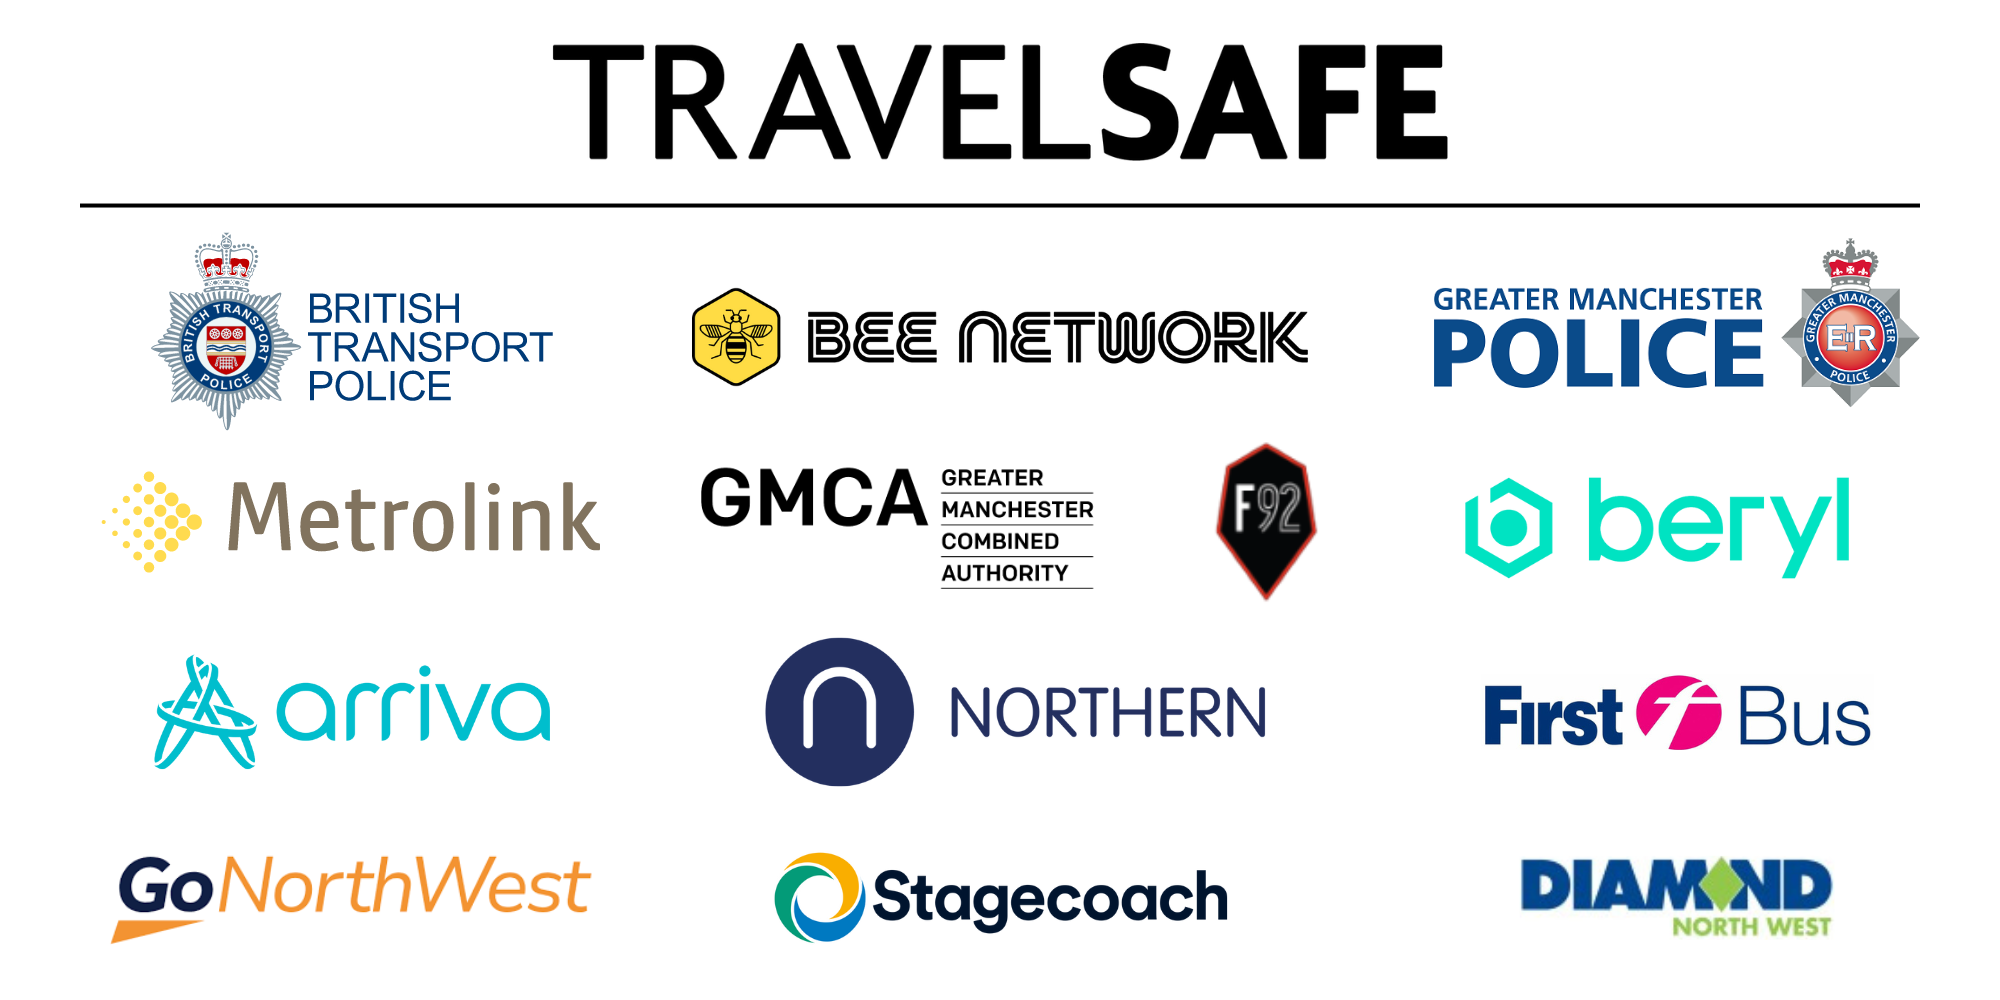 All travelsafe logos including the police, bee network, metrolink, gmca, beryl, arrive, foundation 92, first bus, go north west, stagecoach and diamond